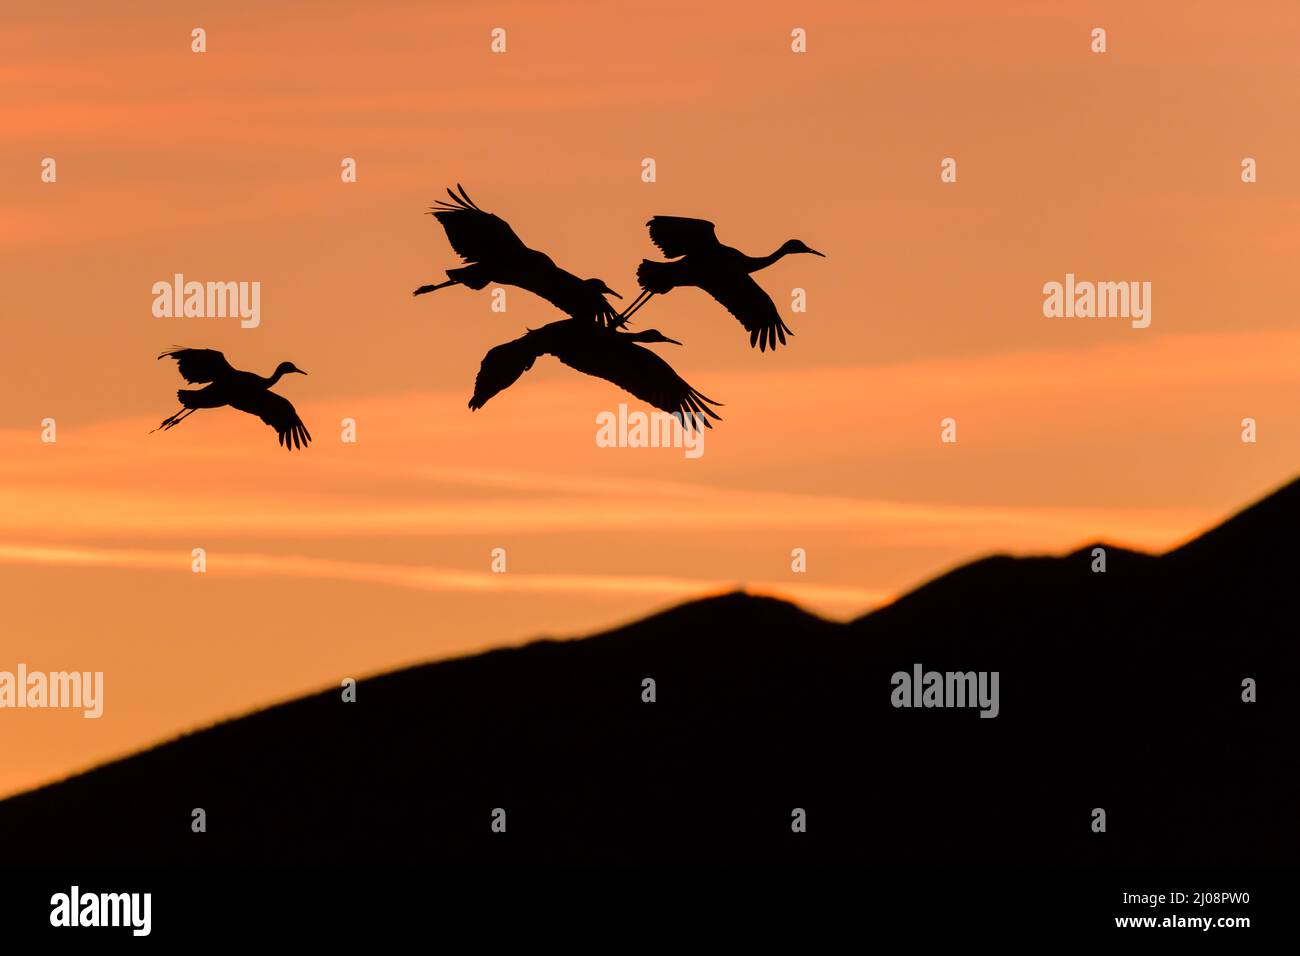 Flying Sandhill Cranes - A group of Sandhill Cranes flying in colorful dusk sky over rolling hills. New Mexico, USA. Stock Photo